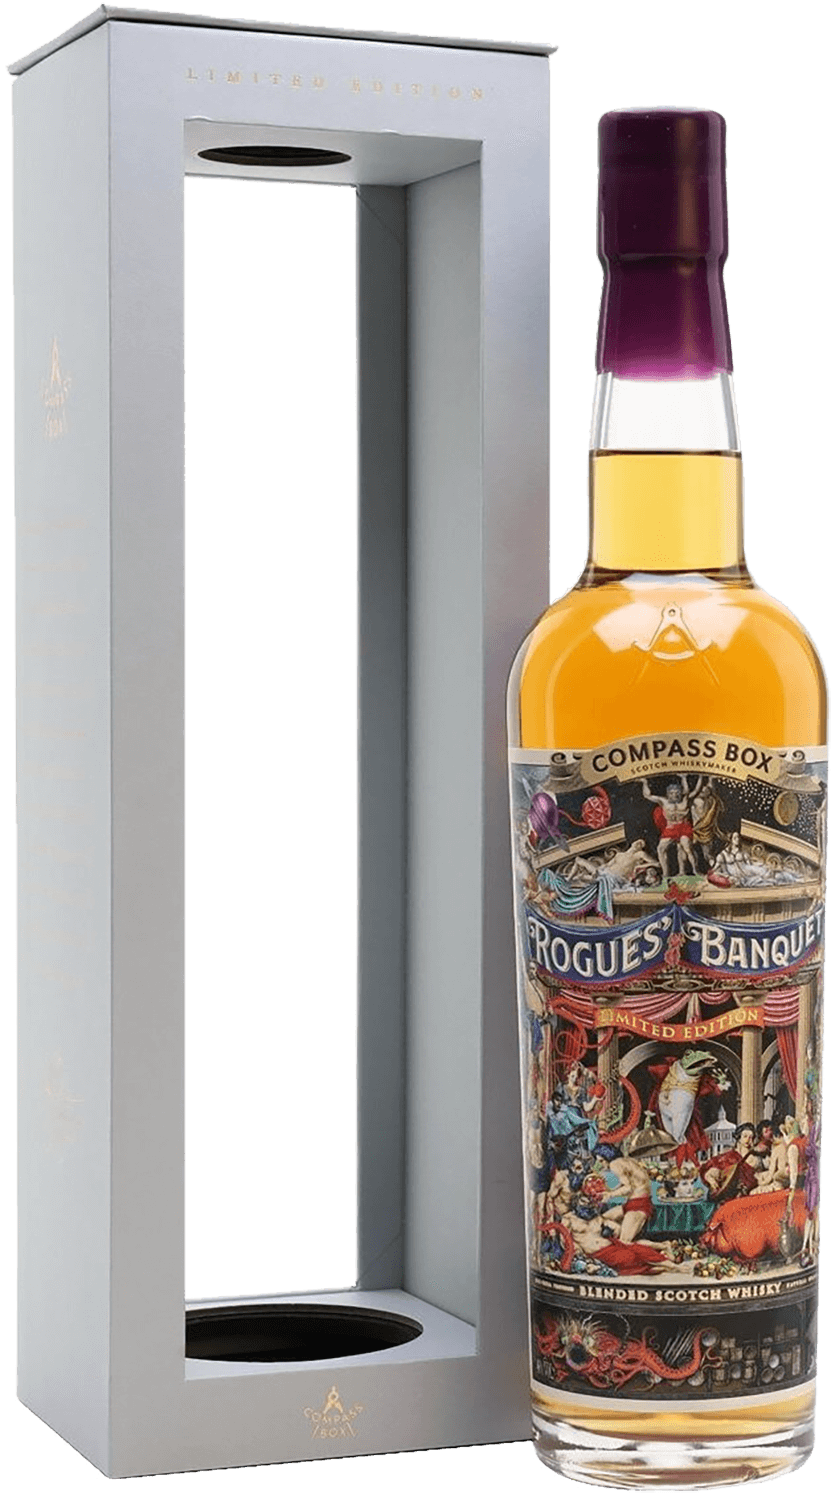 Compass Box Rogues' Banquet Blended Scotch Whisky (gift box) compass box the spice tree blended malt scotch whisky gift box